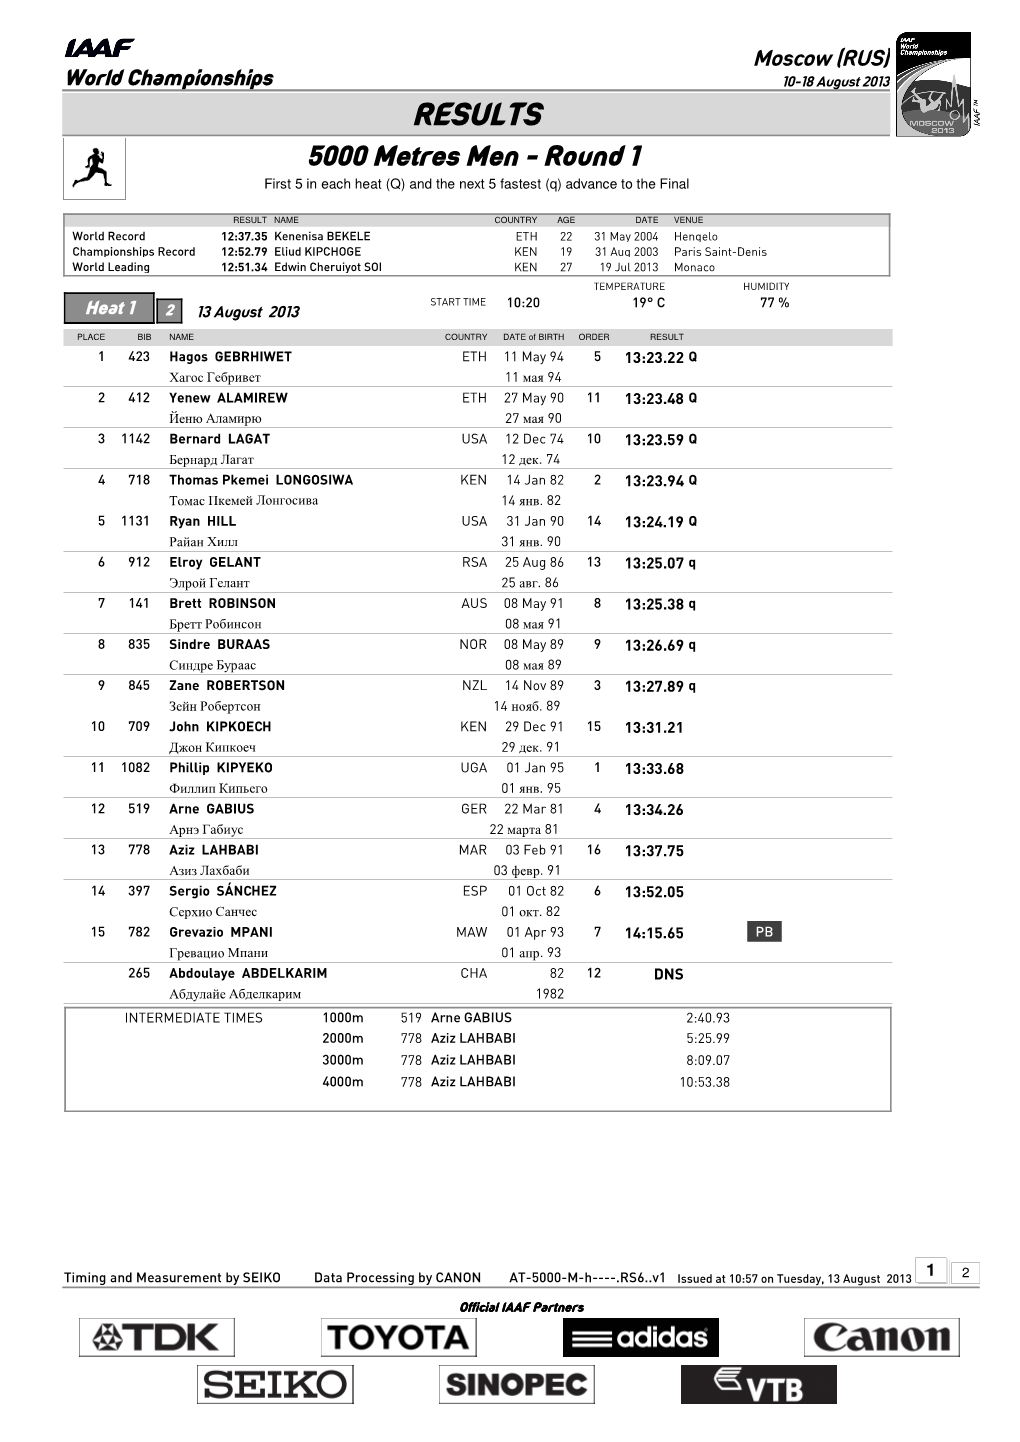 RESULTS 5000 Metres Men - Round 1 First 5 in Each Heat (Q) and the Next 5 Fastest (Q) Advance to the Final